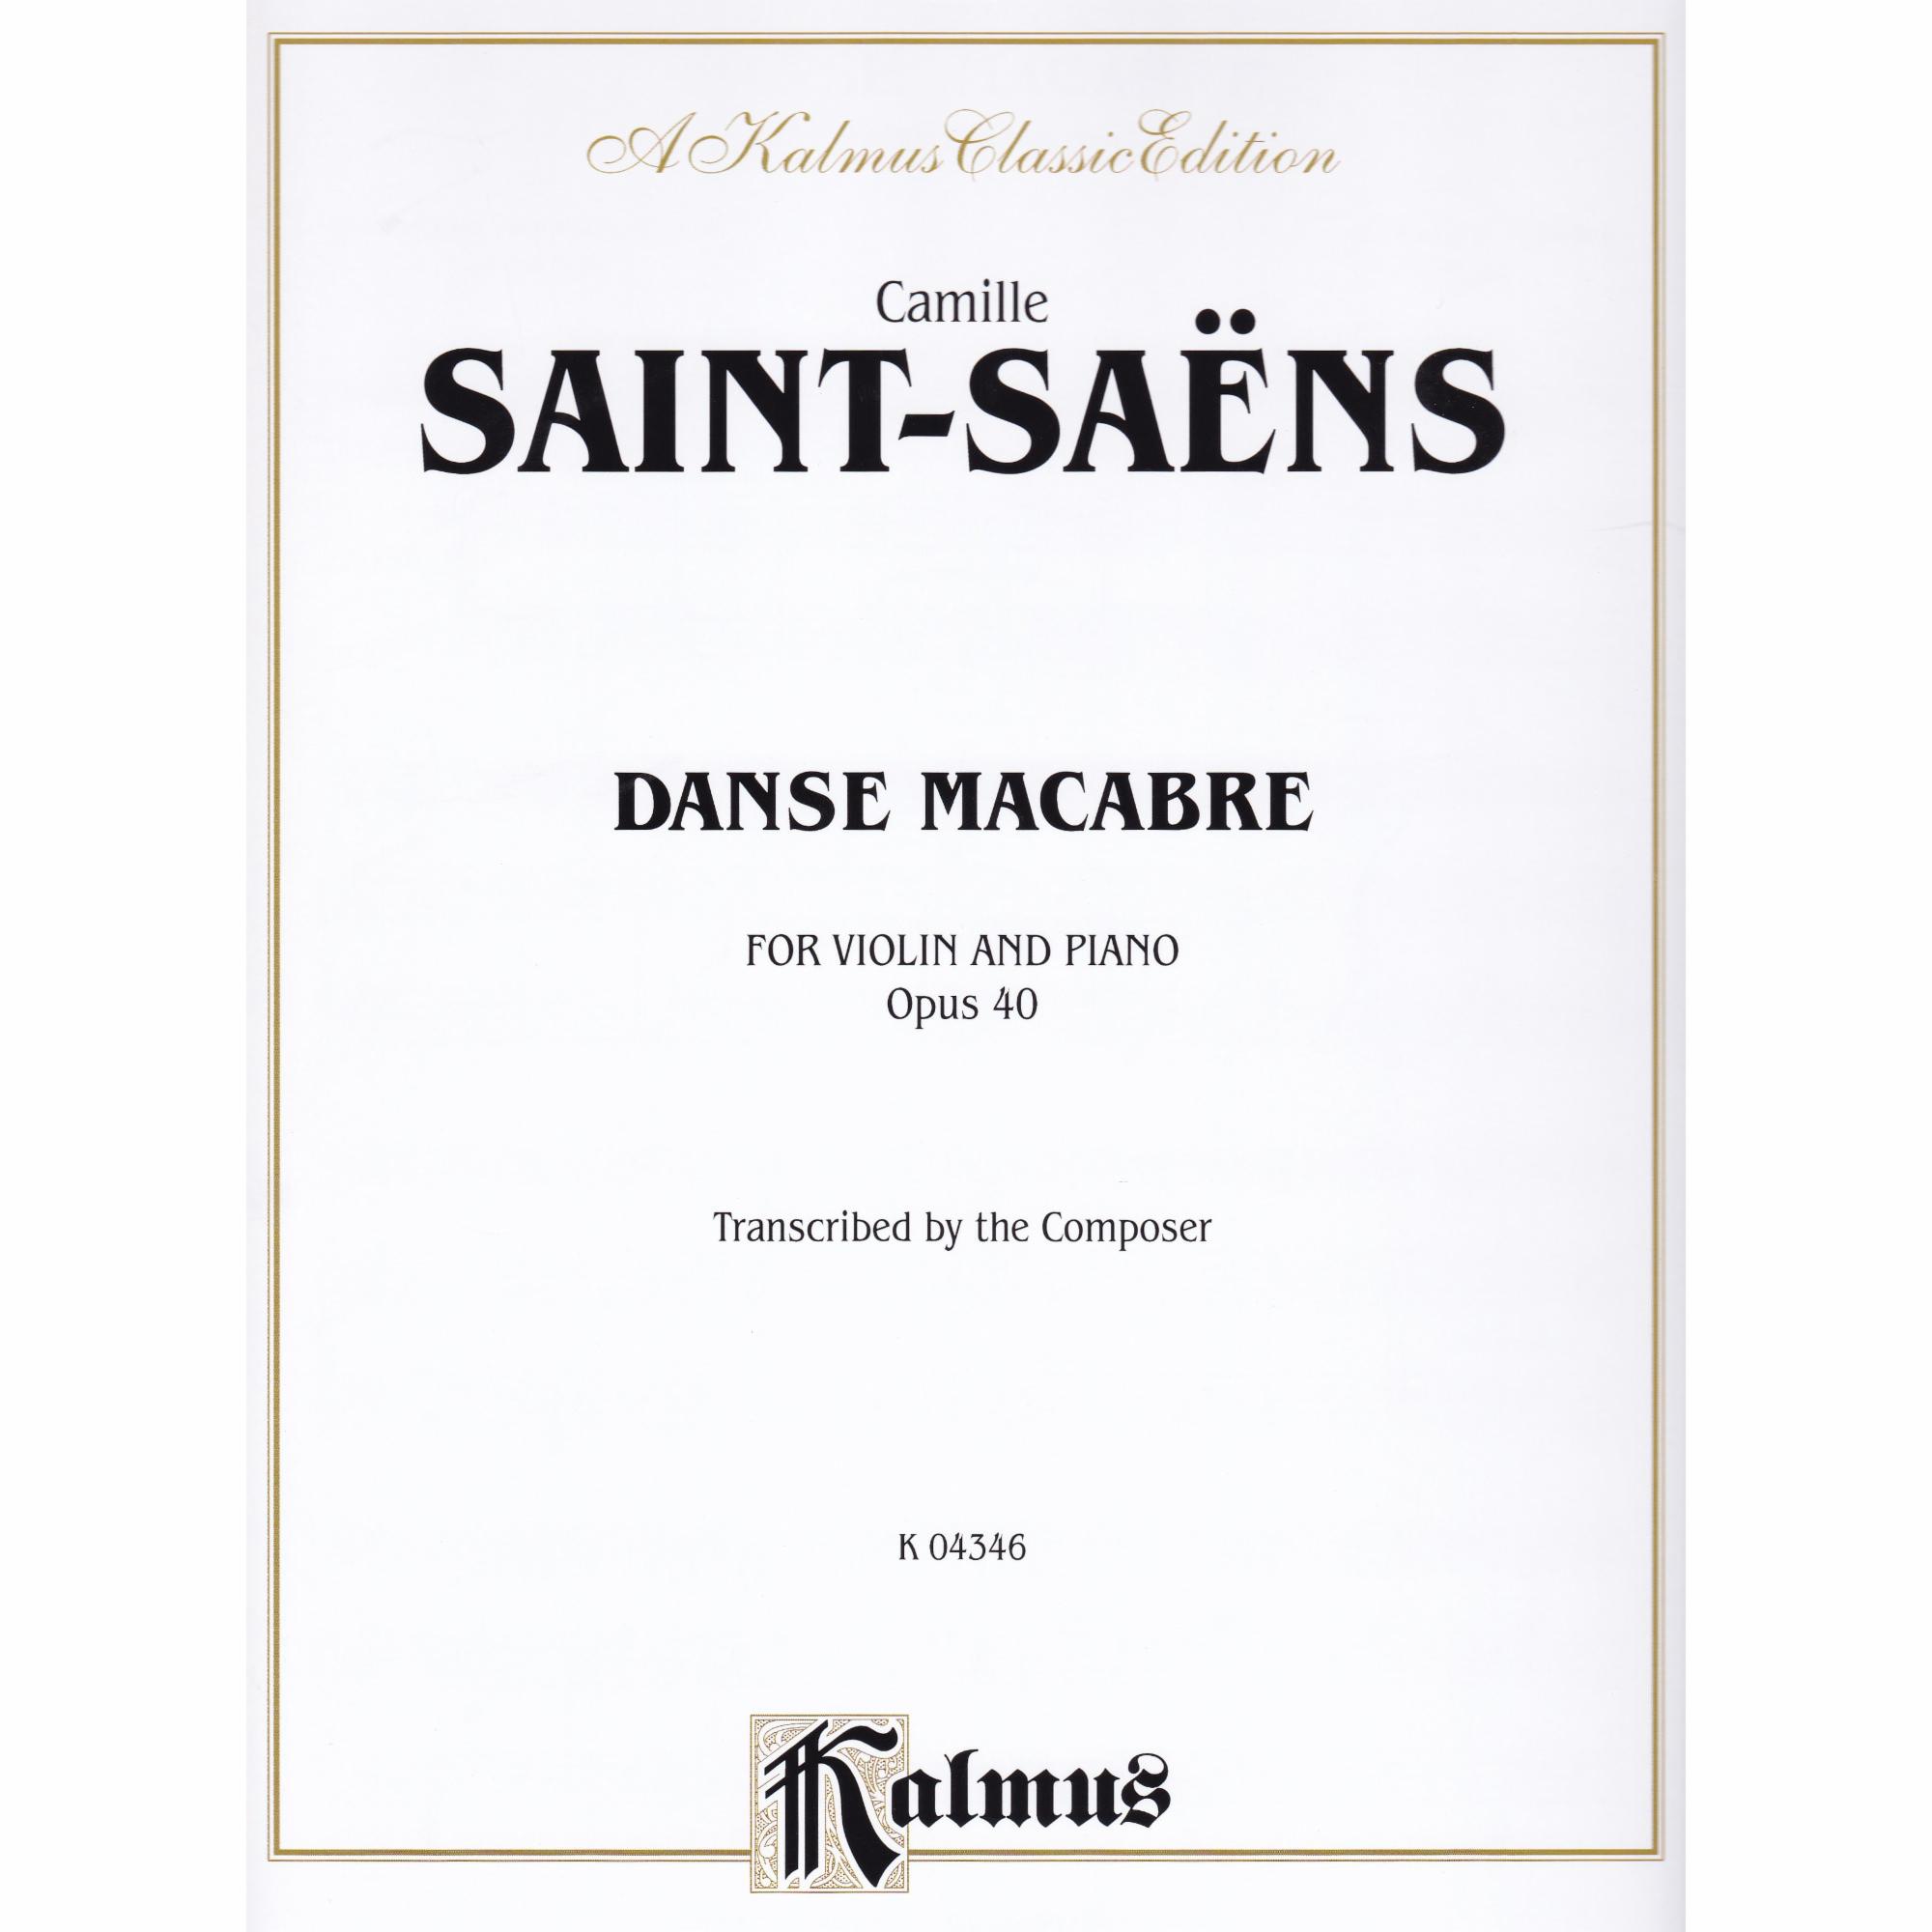 Danse Macabre for Violin and Piano, Op. 40